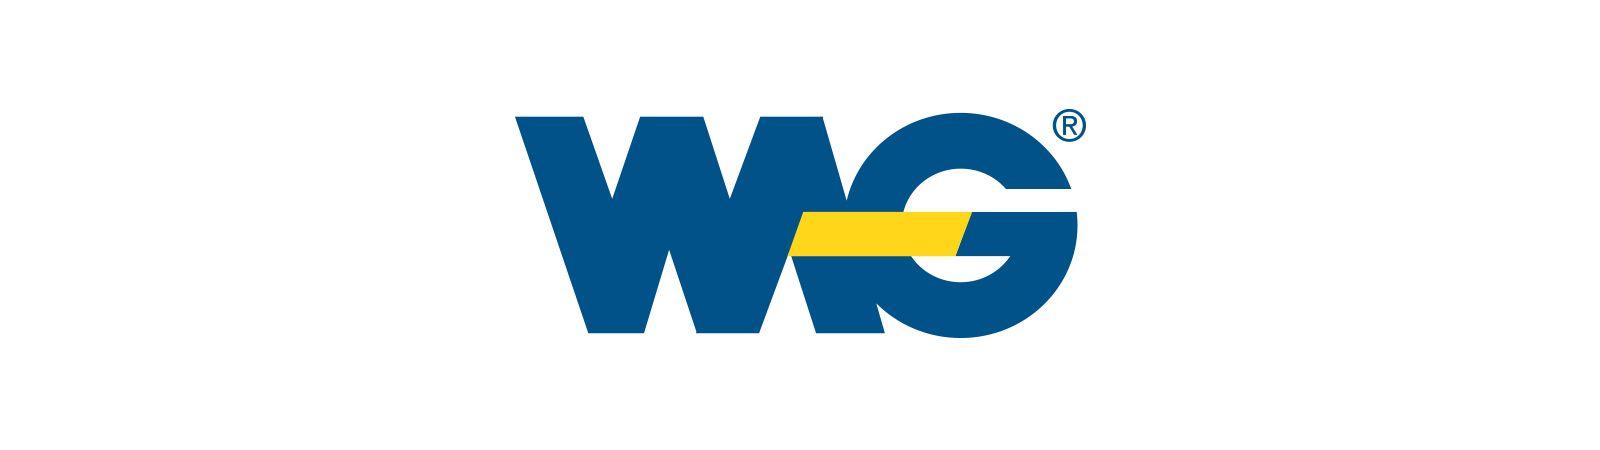 Wag Logo - Eurowag | Financial Services Sector | TA | A Private Equity Firm